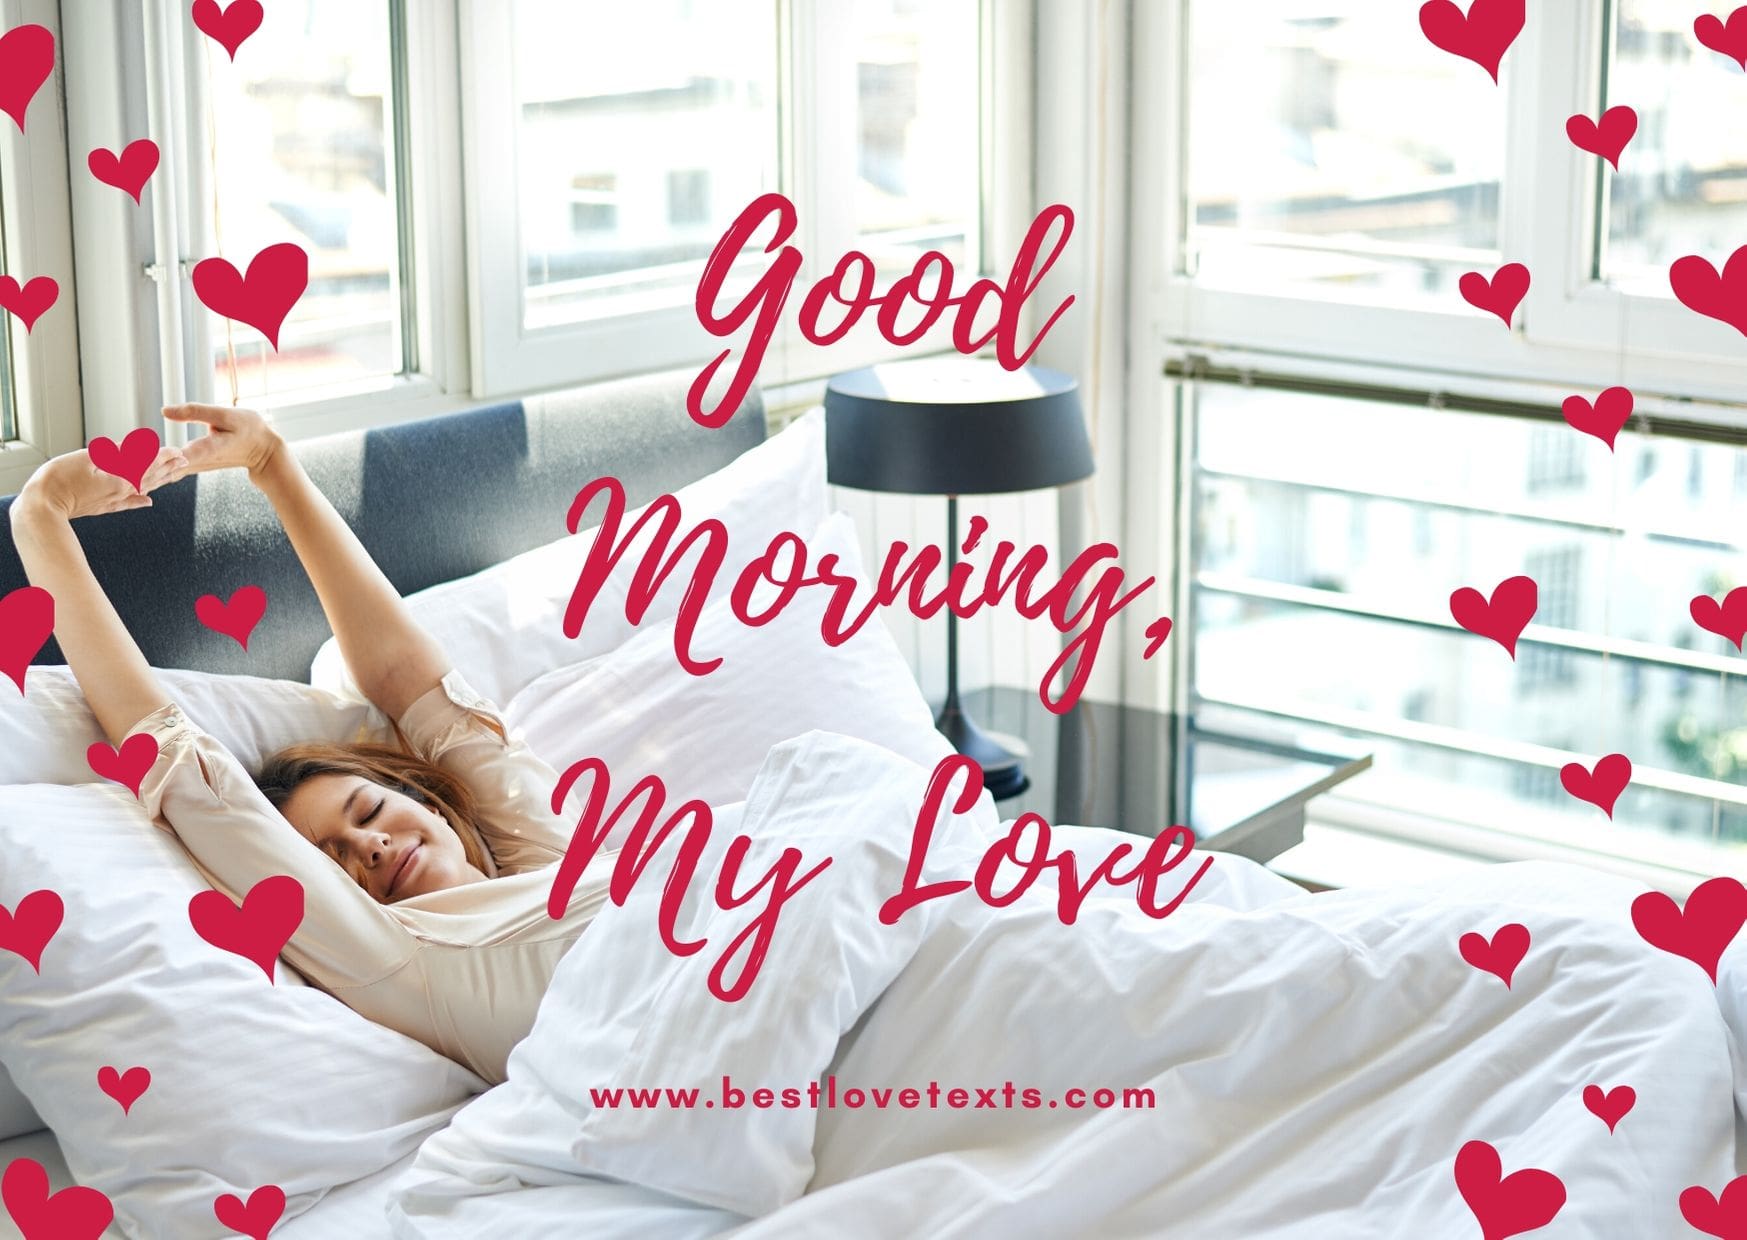 +25 Latest Good Morning Wishes, SMS & Greetings to Your Love Best